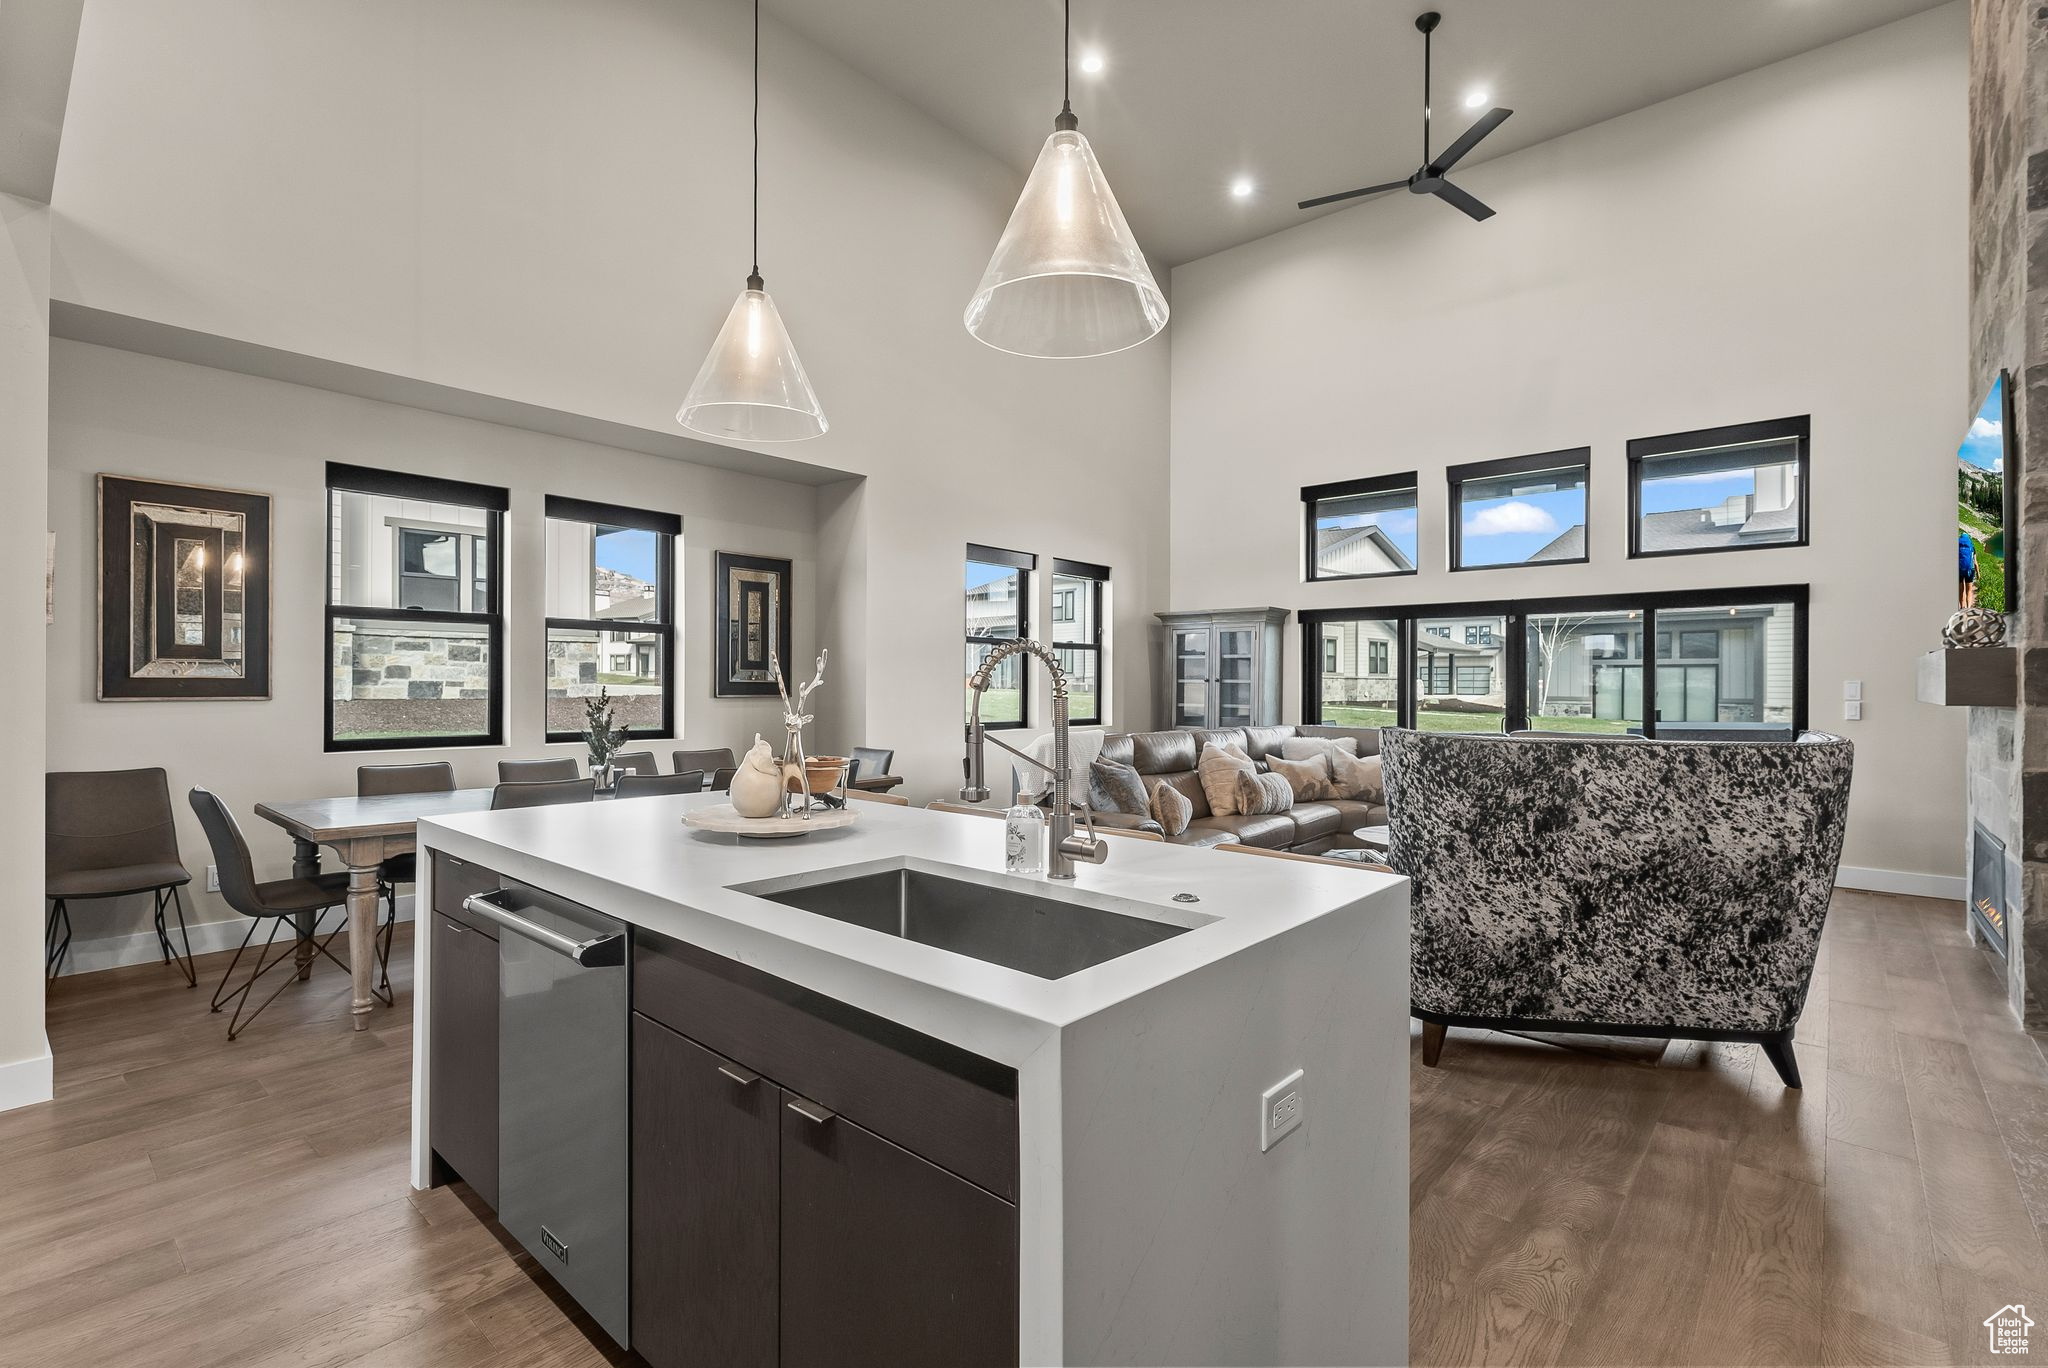 Kitchen featuring decorative light fixtures, hardwood / wood-style floors, a towering ceiling, sink, and stainless steel dishwasher